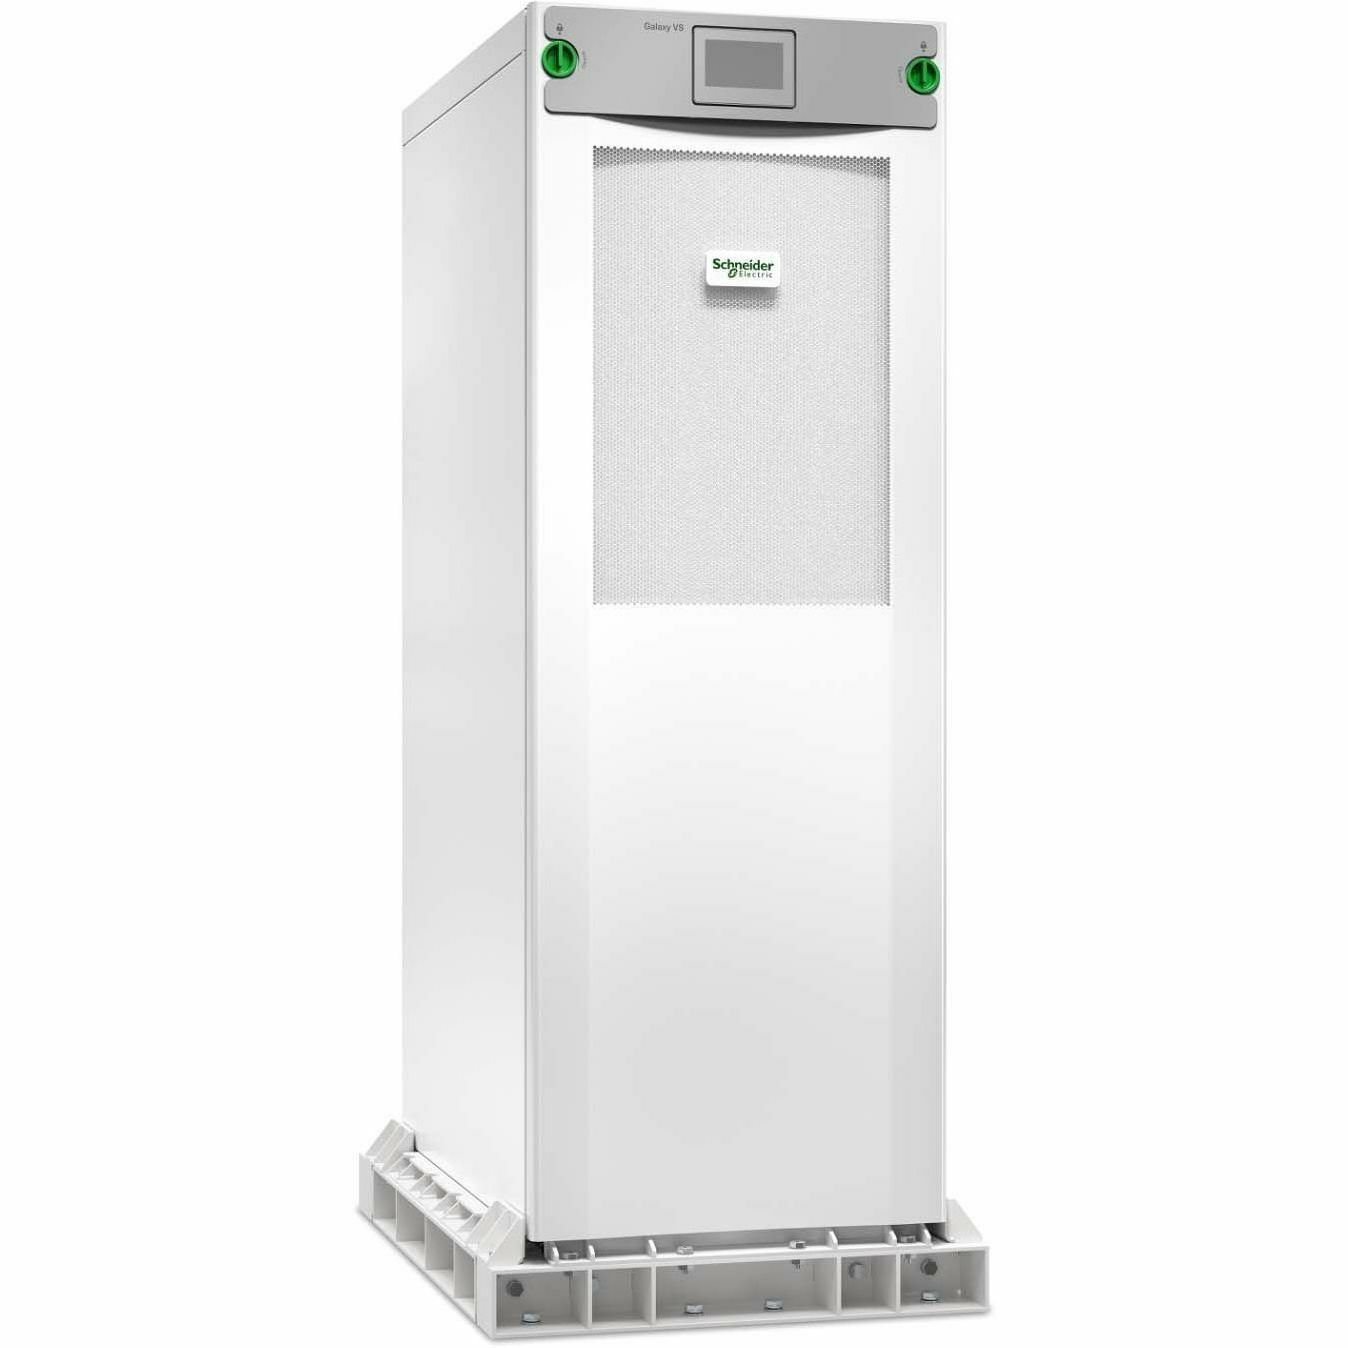 APC by Schneider Electric Galaxy VS Double Conversion Online UPS - 100 kVA/100 kW - Three Phase